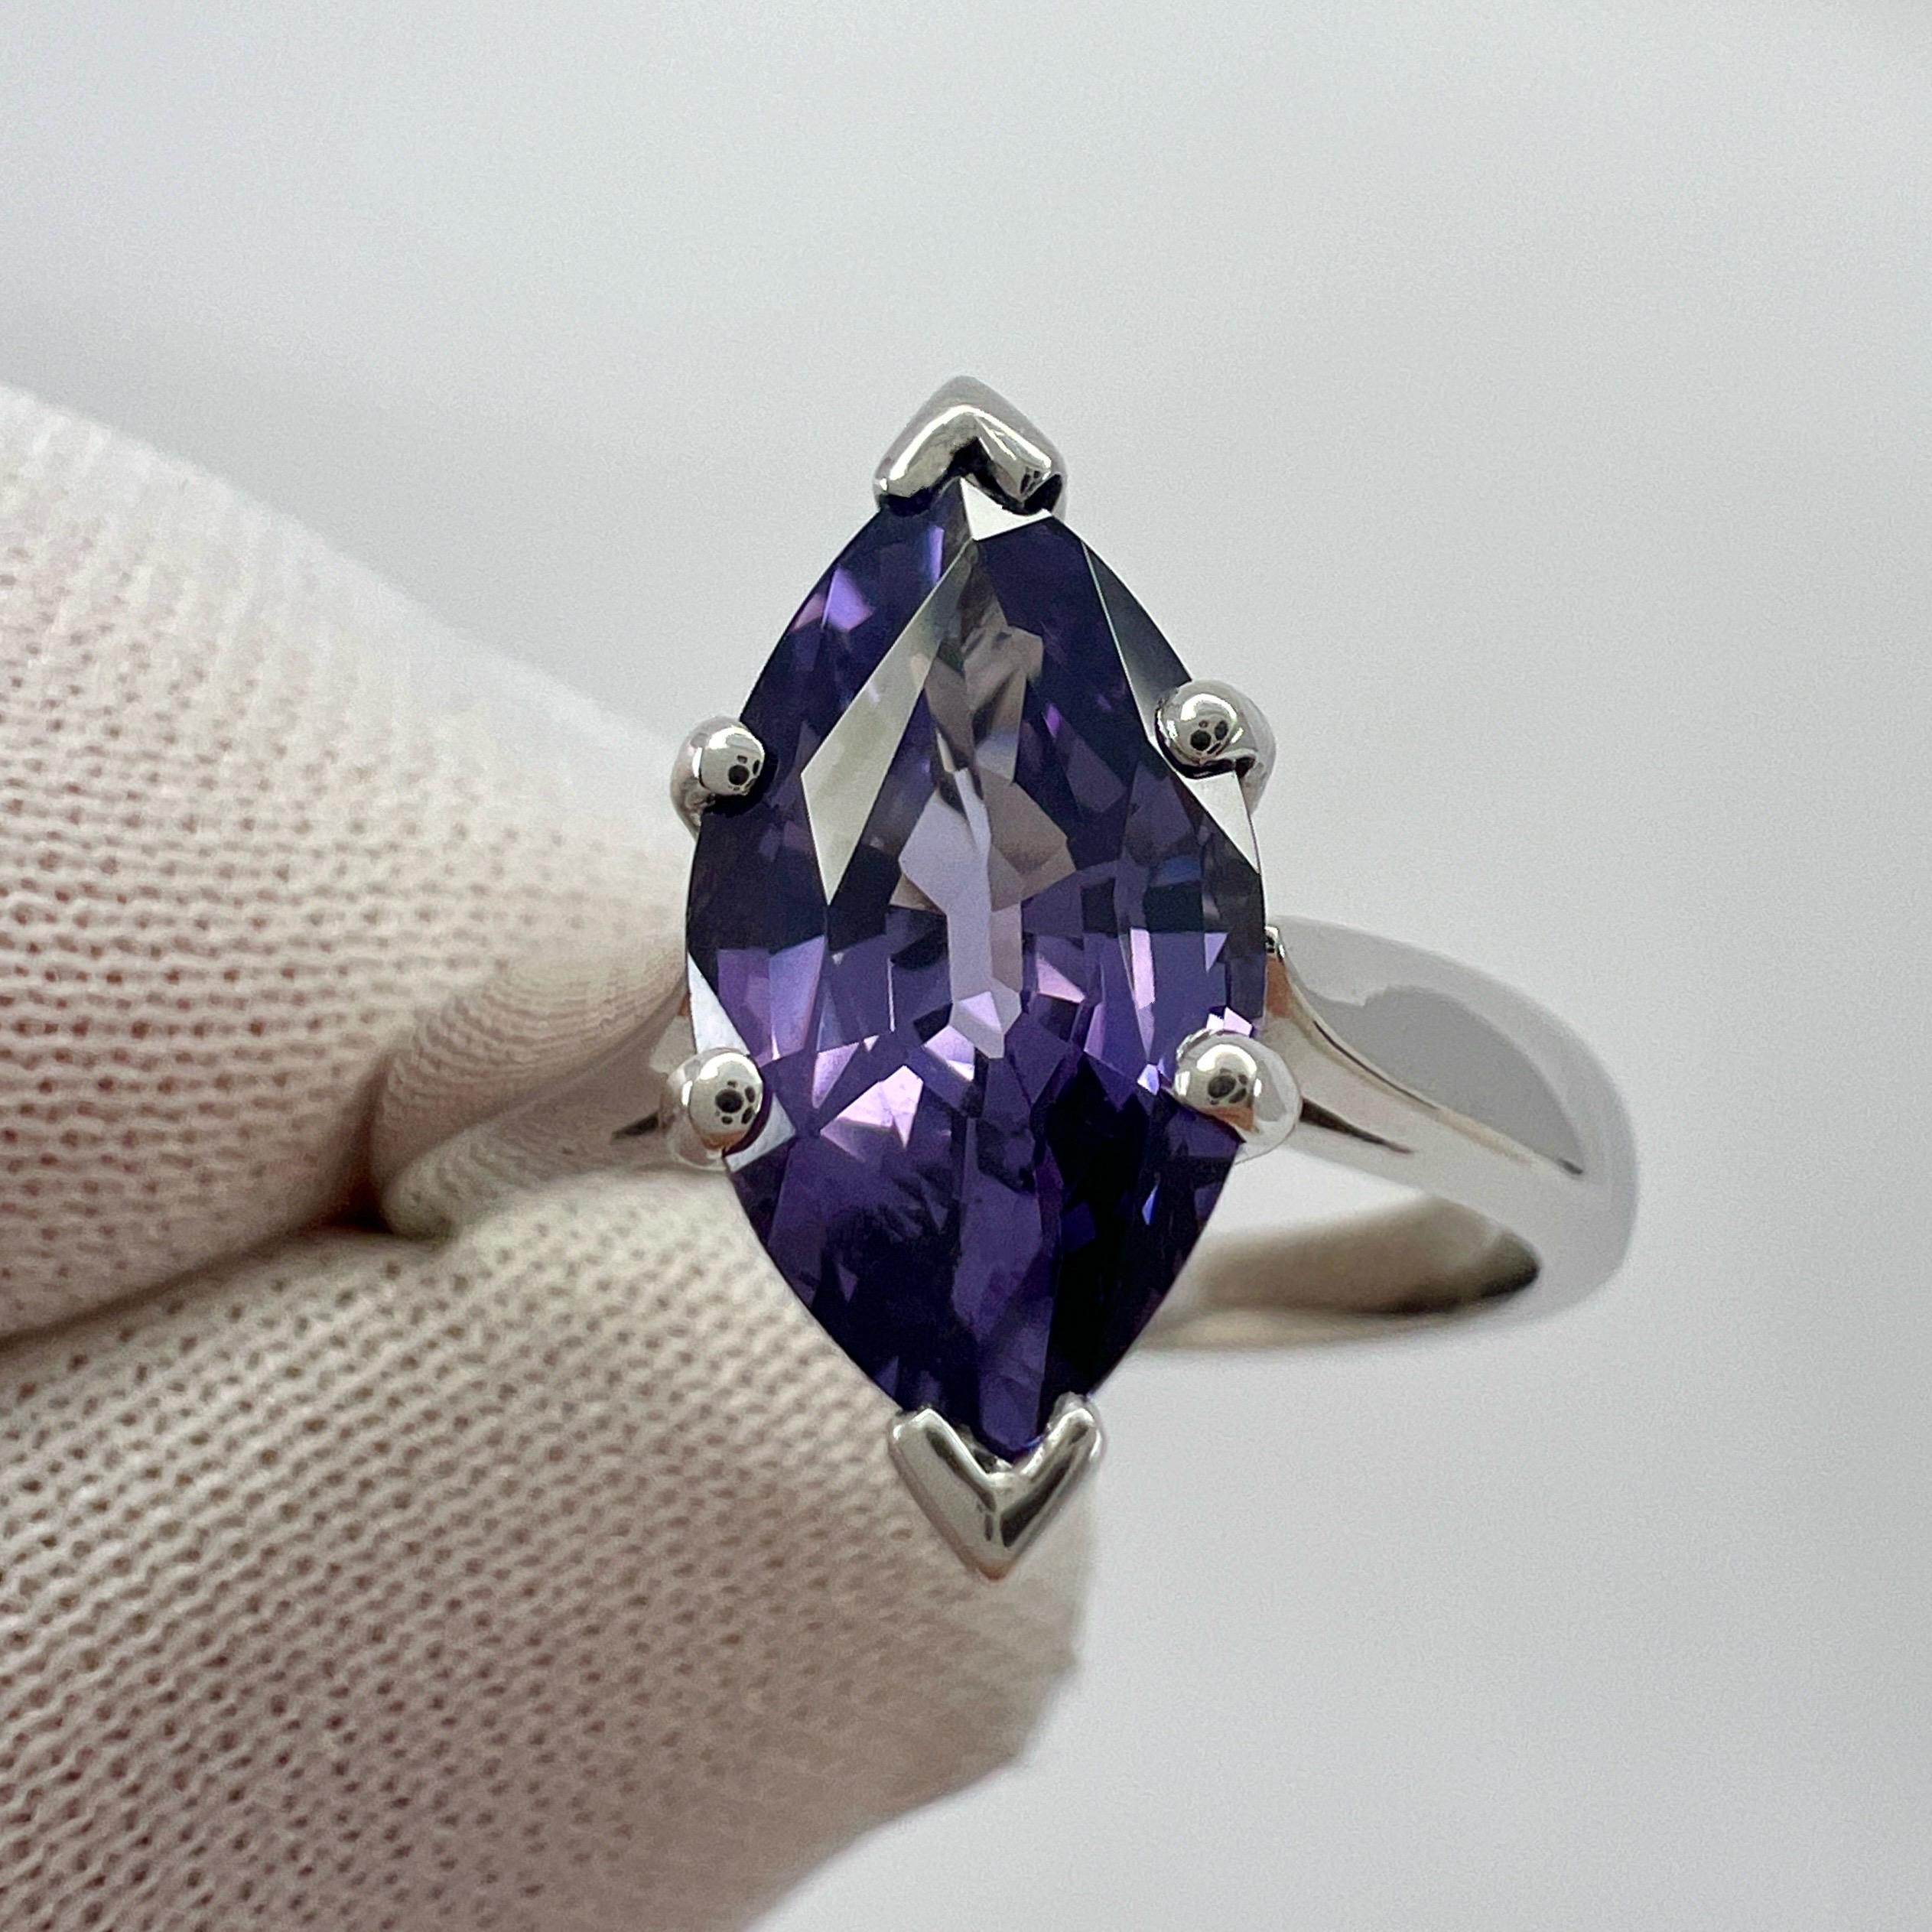 Fine Natural Vivid Purple Violet Spinel 18k White Gold Solitaire Ring.

2.13 Carat Spinel with a stunning vivid purple violet colour and excellent clarity. Unique and top grade stone.

The spinel also has an excellent marquise/navette cut which